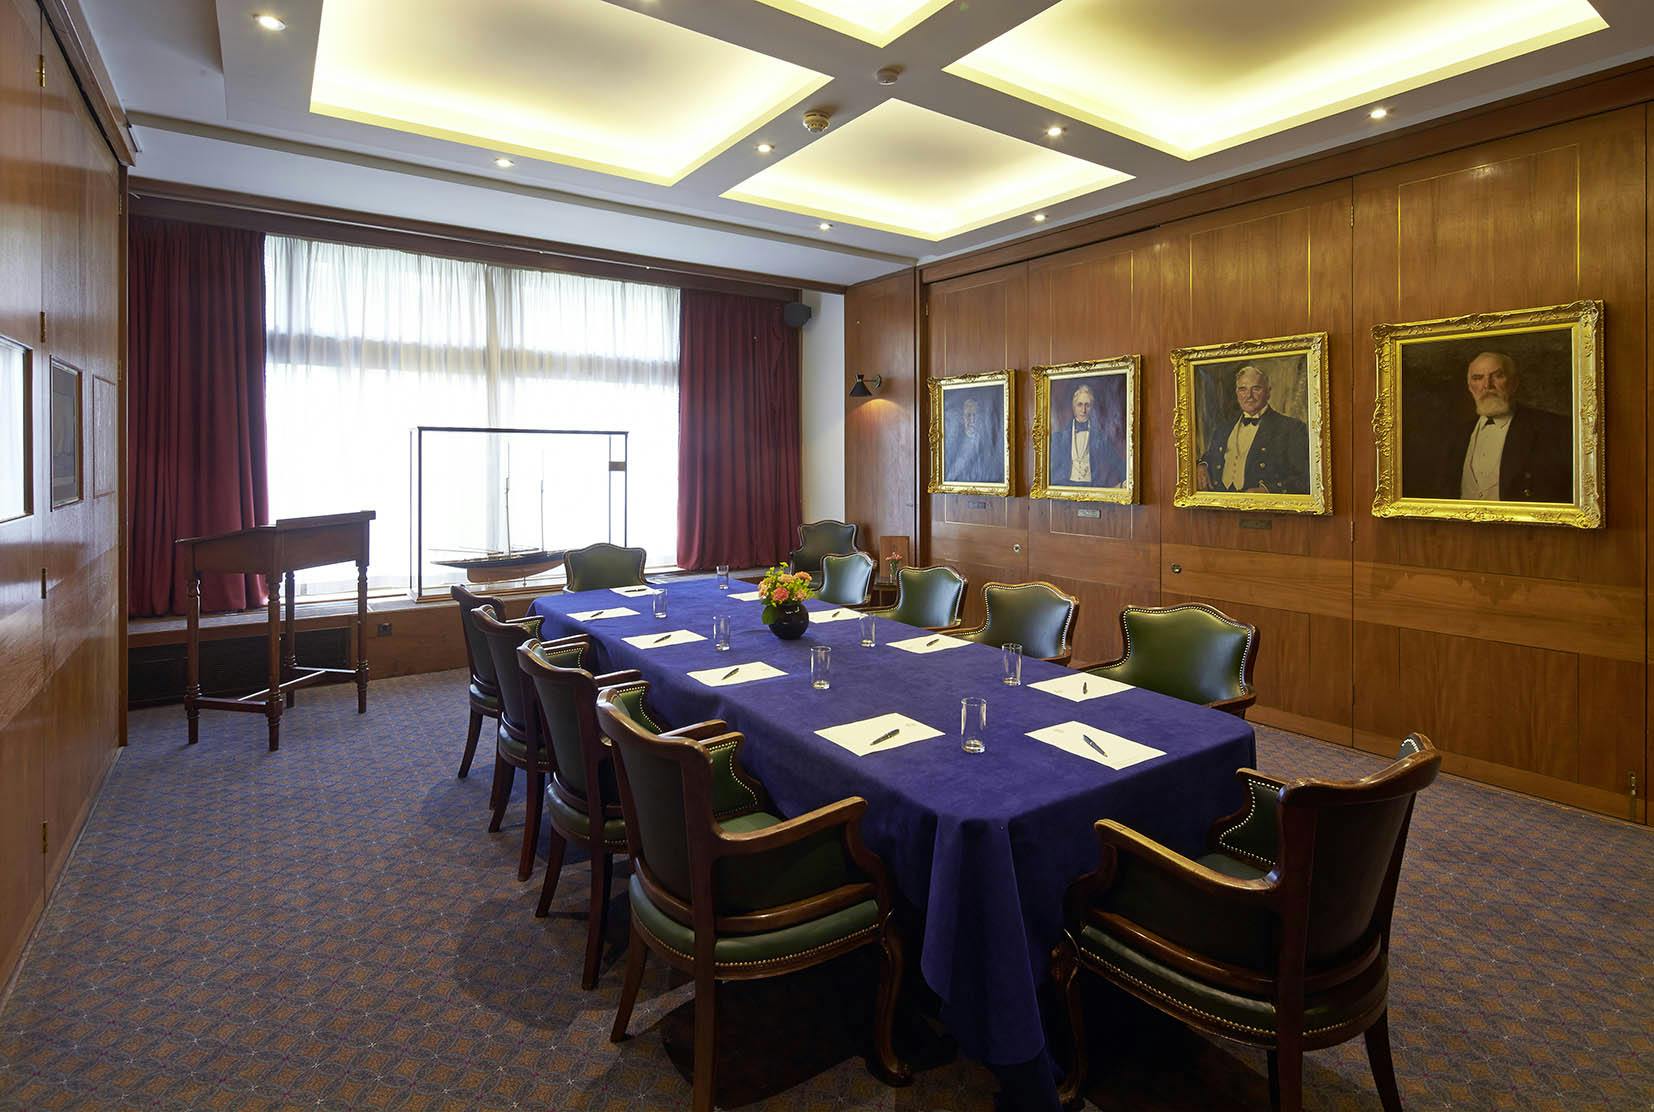 The Royal Thames Yacht Club  - Queenborough Room image 2